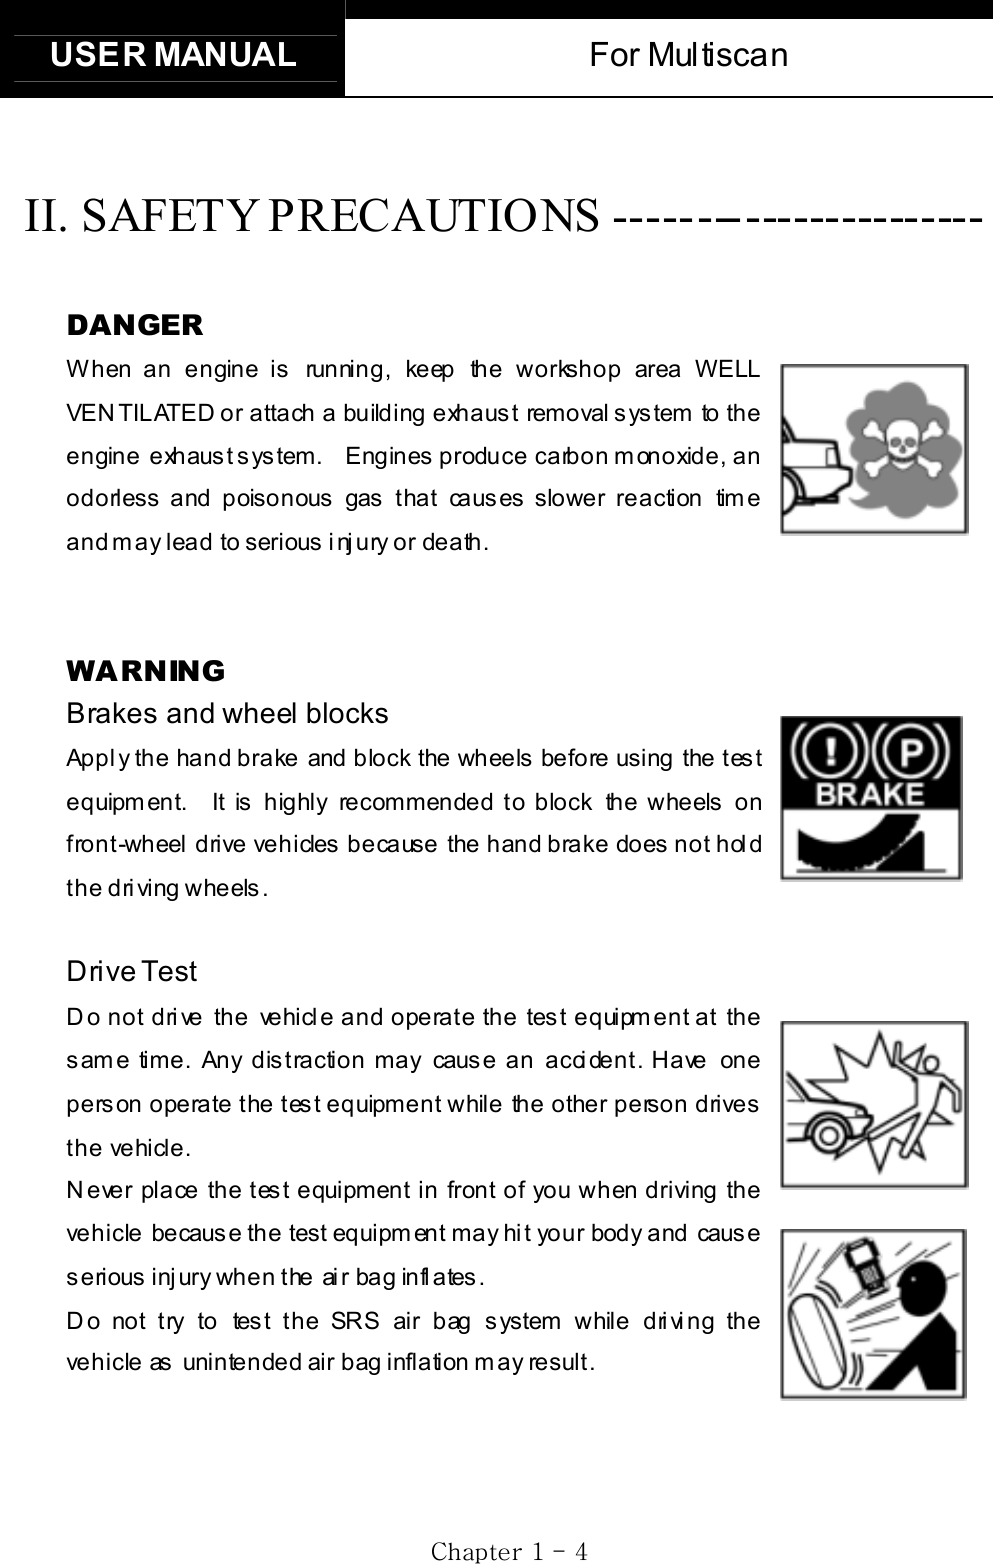 USER MANUAL  For Multiscan   GjGXGTG [GGII. SAFETY PRECAUTIONS ----------------------- GDANGER When an engine is running, keep the workshop area WELL VENTILATED or attach a building exhaust removal system to the engine  exhaust system.    Engines produce carbon monoxide, an odorless and poisonous gas that causes slower reaction time and may lead to serious injury or death. GGWARNING Brakes and wheel blocksApply the hand brake and block the wheels before using the test equipment.  It is highly recommended to block the wheels on front-wheel drive vehicles because the hand brake does not hold the driving wheels. GDrive Test Do not drive the vehicle and operate the test equipment at the same time. Any distraction may cause an accident. Have one person operate the test equipment while the other person drives the vehicle. Never place the test equipment in front of you when driving the vehicle becaus e the test equipm ent may hi t your body and caus e s erious  inj ury when the ai r bag infl ates .   D o not try to tes t the SRS air bag s ystem while dri vi ng the vehicle as unintended air bag inflation may result. 